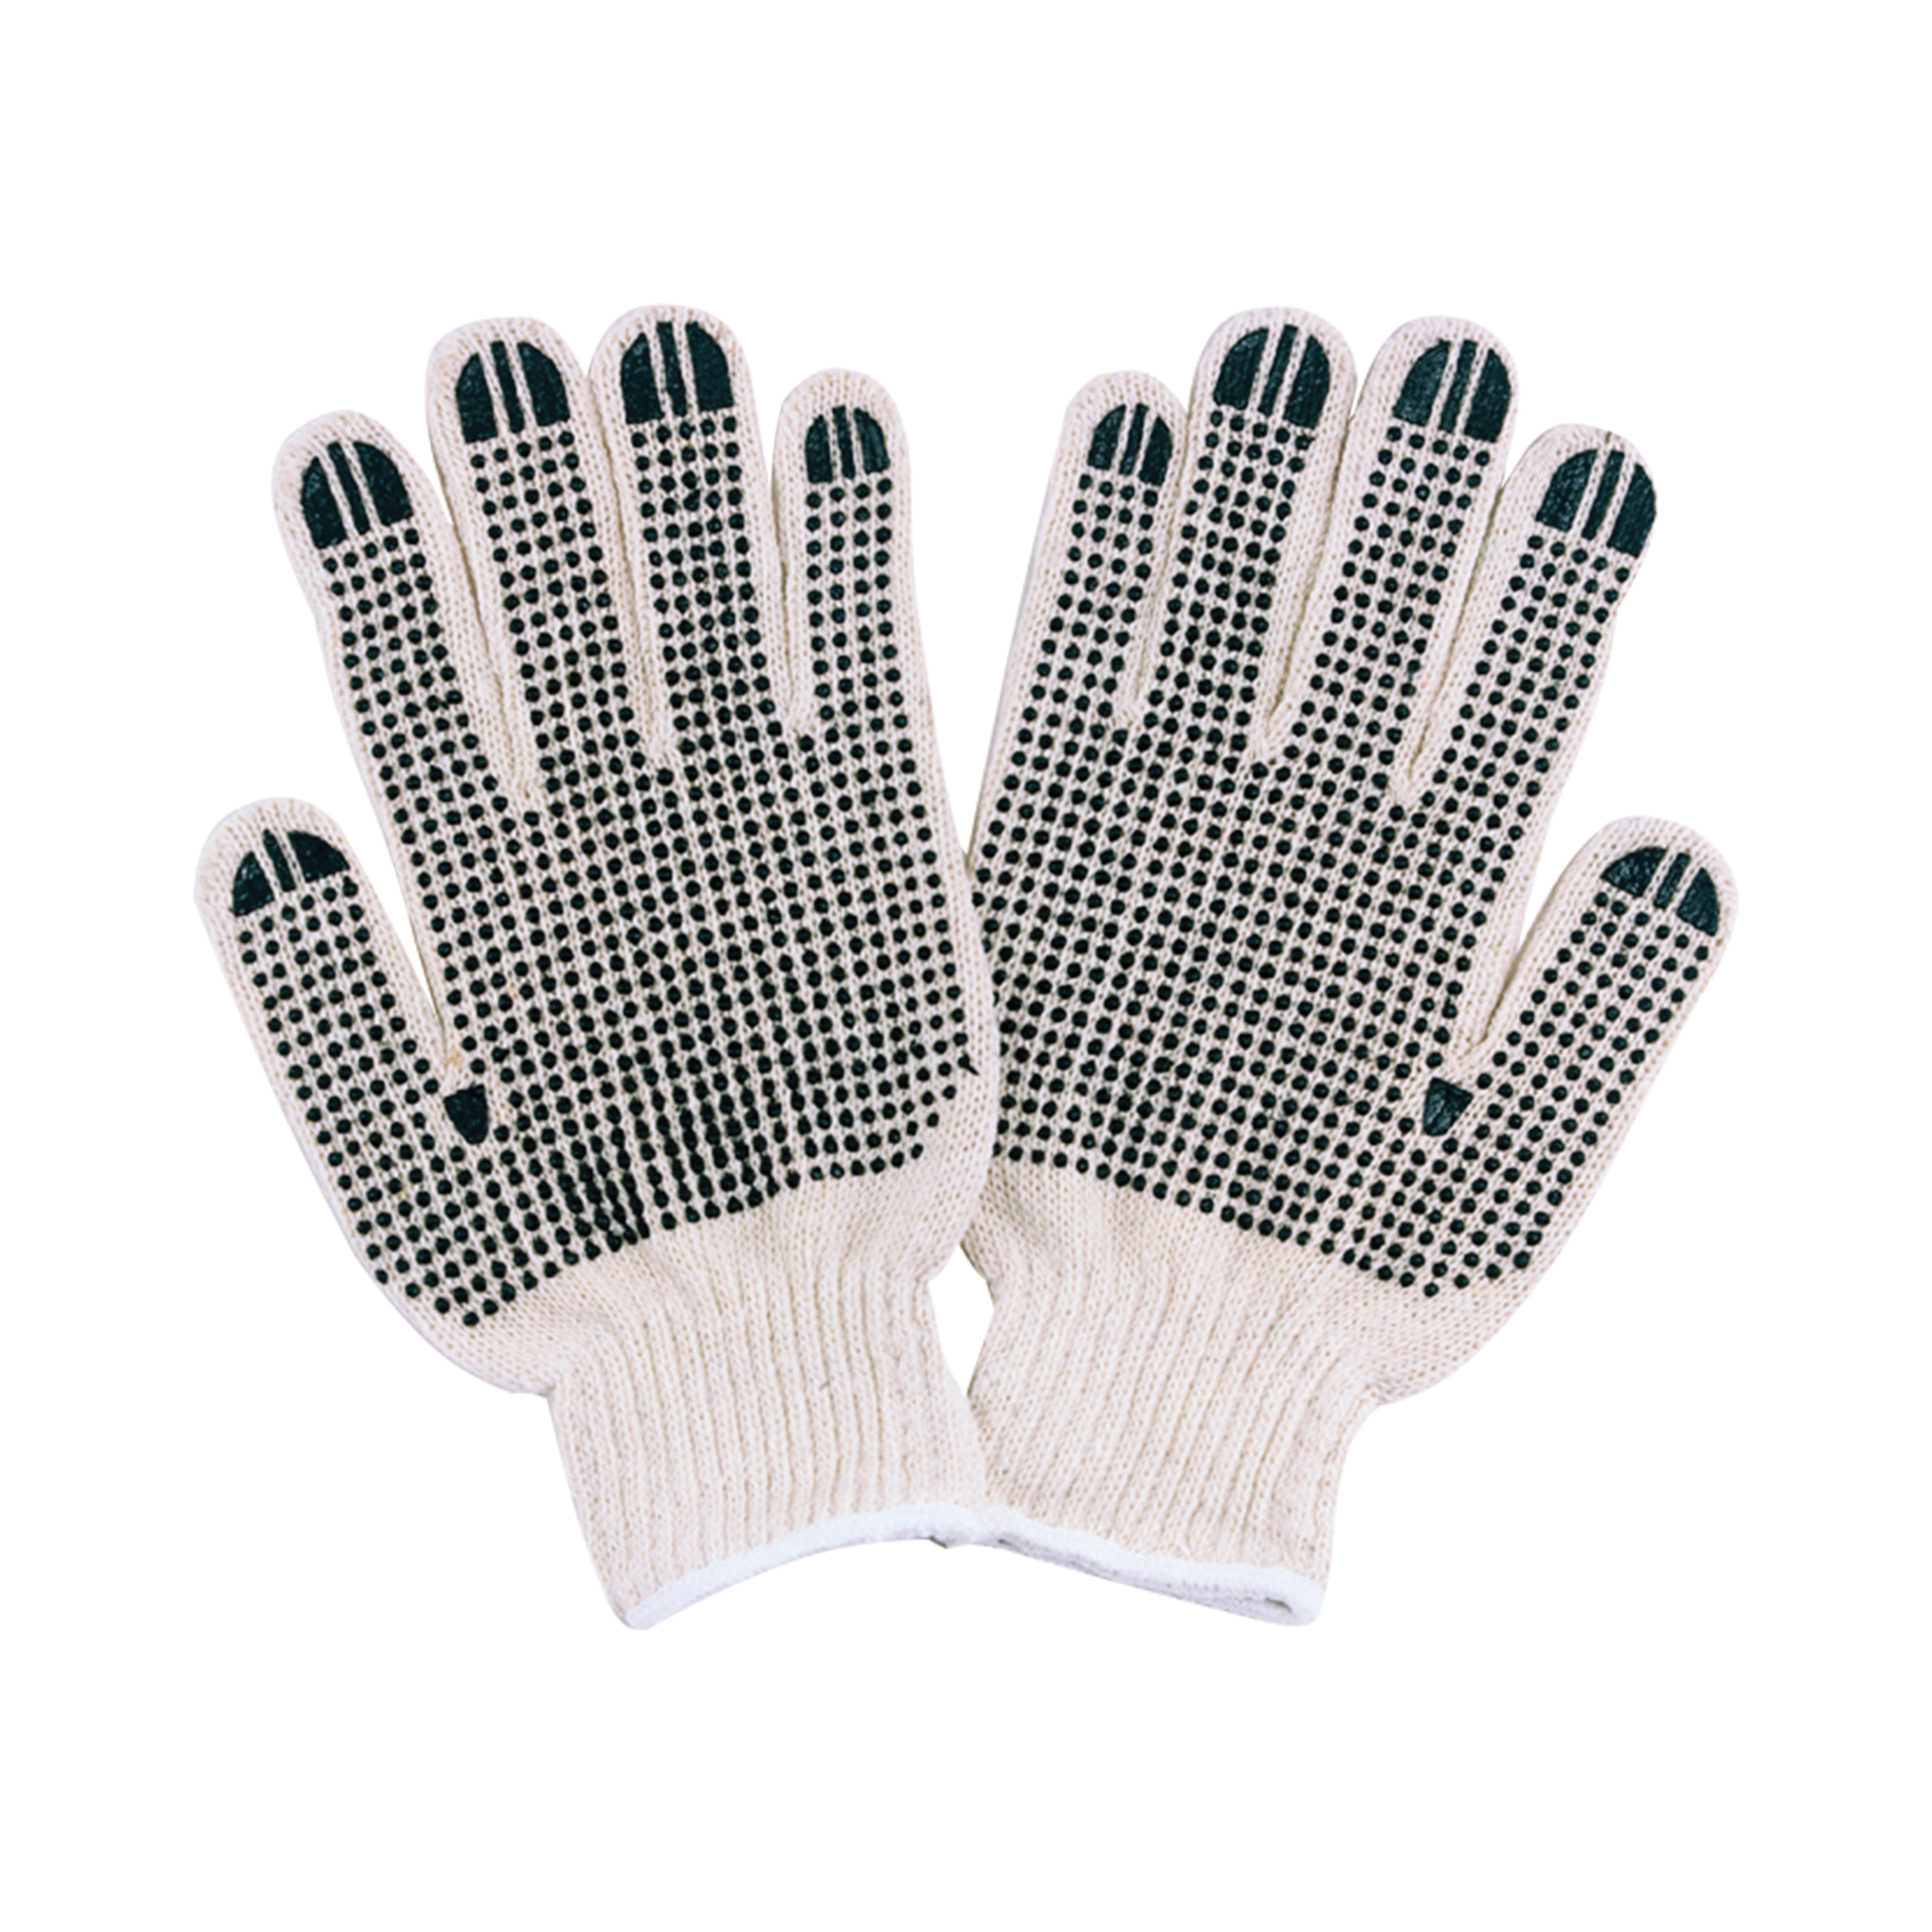 FO809PVD2 Knitted Work Gloves with PVC Dots, One-Size, Ribbed Knit Wrist, 60% Cotton 40% Polyester, Natural White